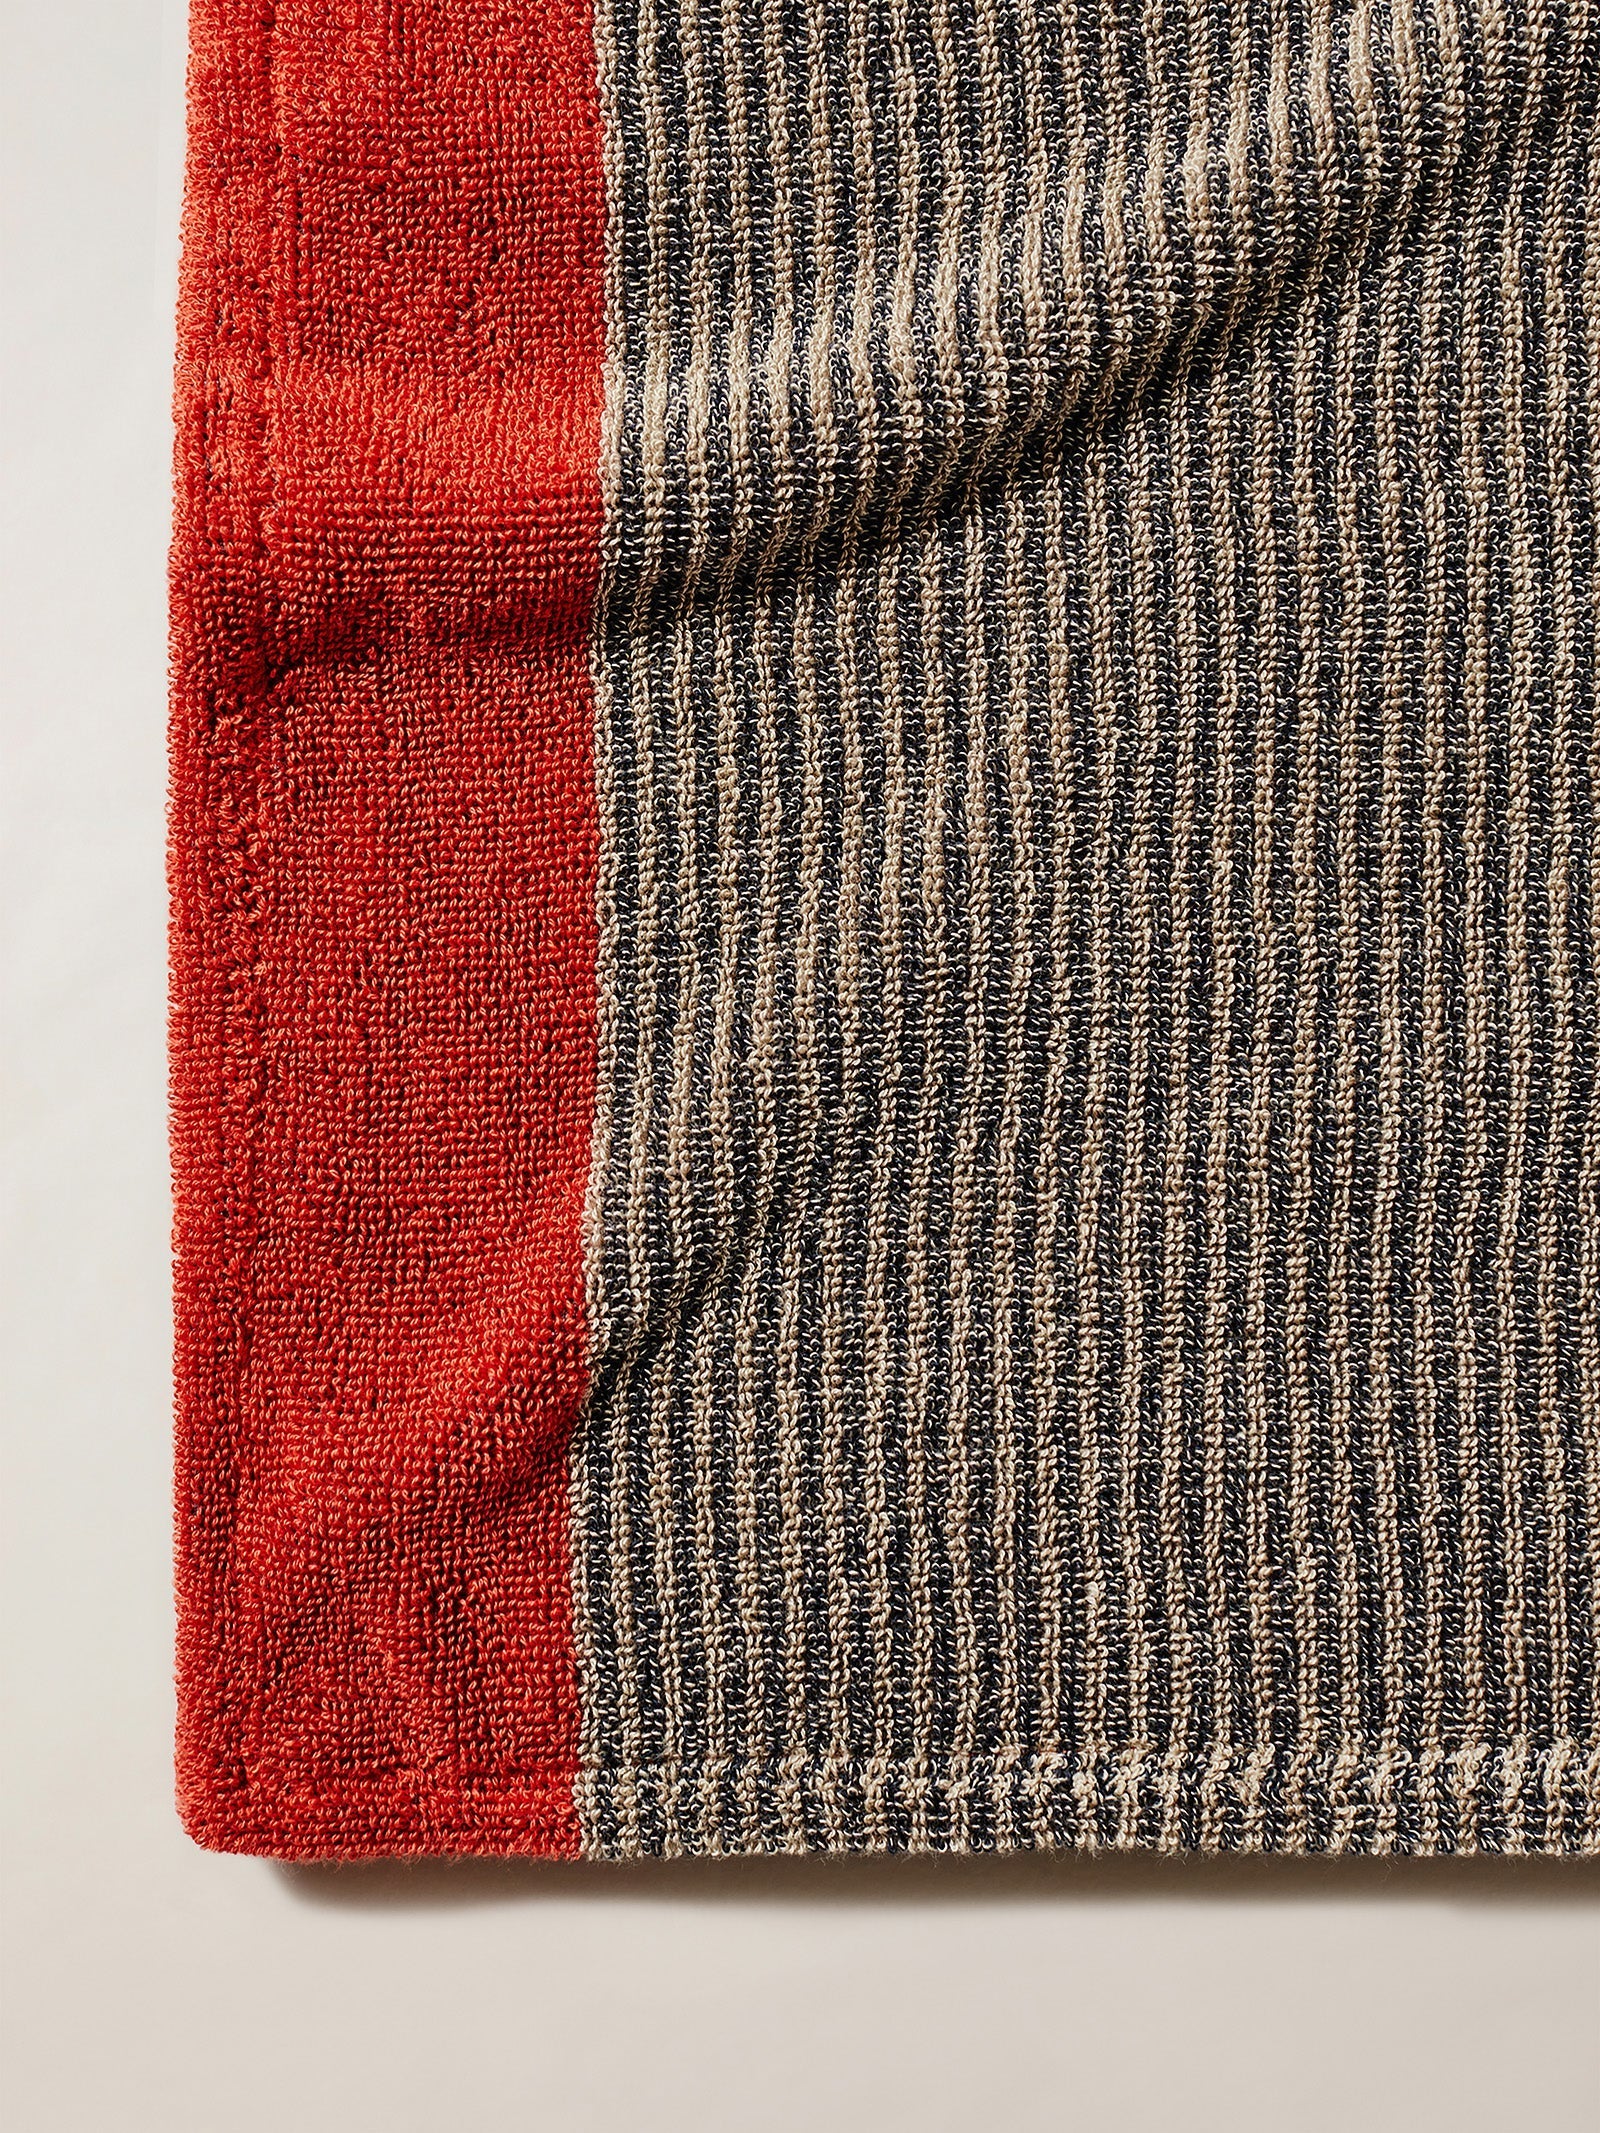 Small Towel - Smoke and Terra Red